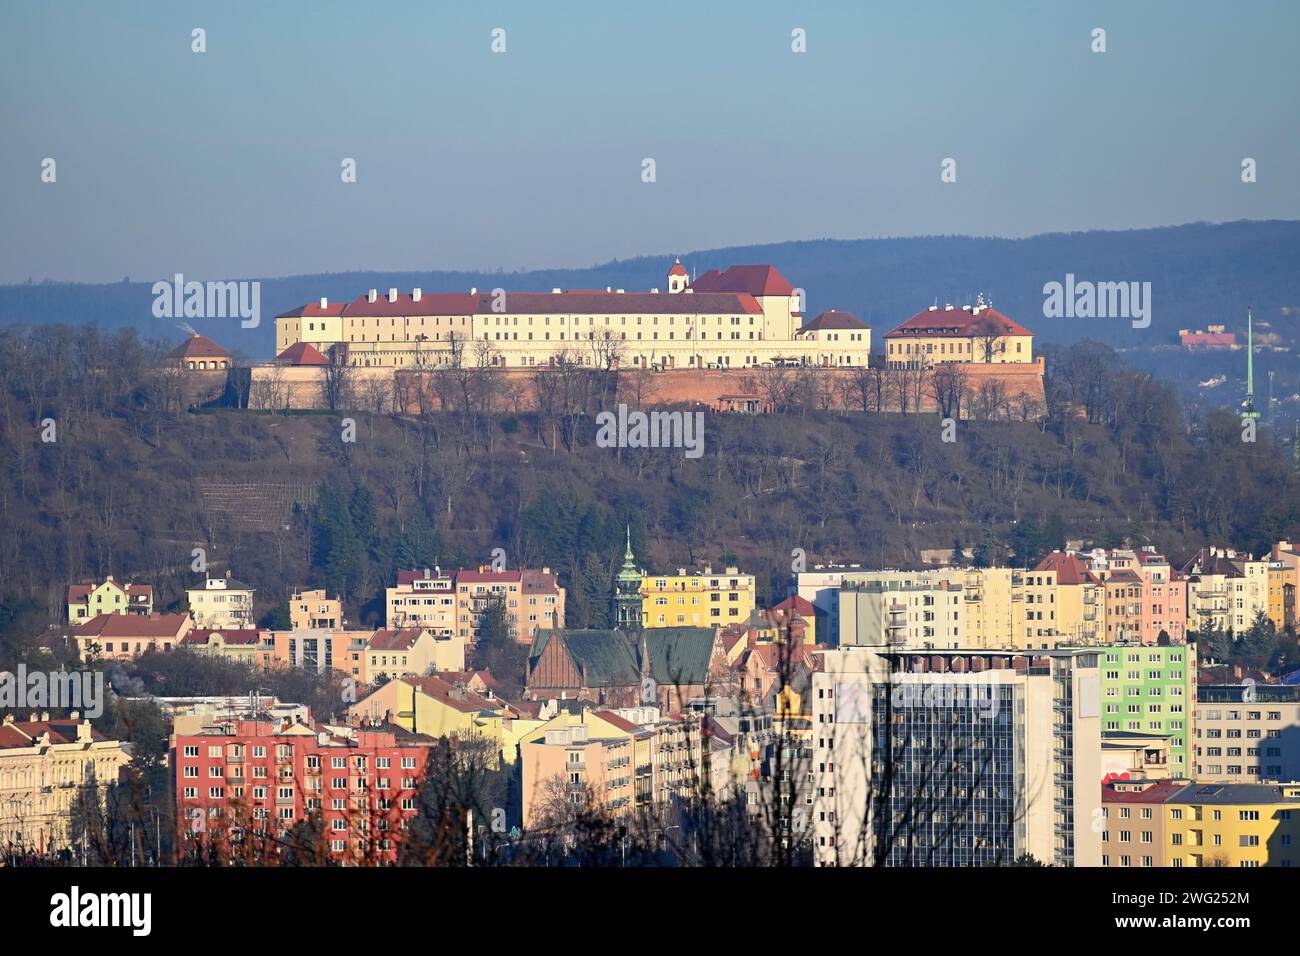 City Brno - Czech Republic - Europe. Spilberk - beautiful old castle and fortress forming the dominant of the city of Brno. Stock Photo